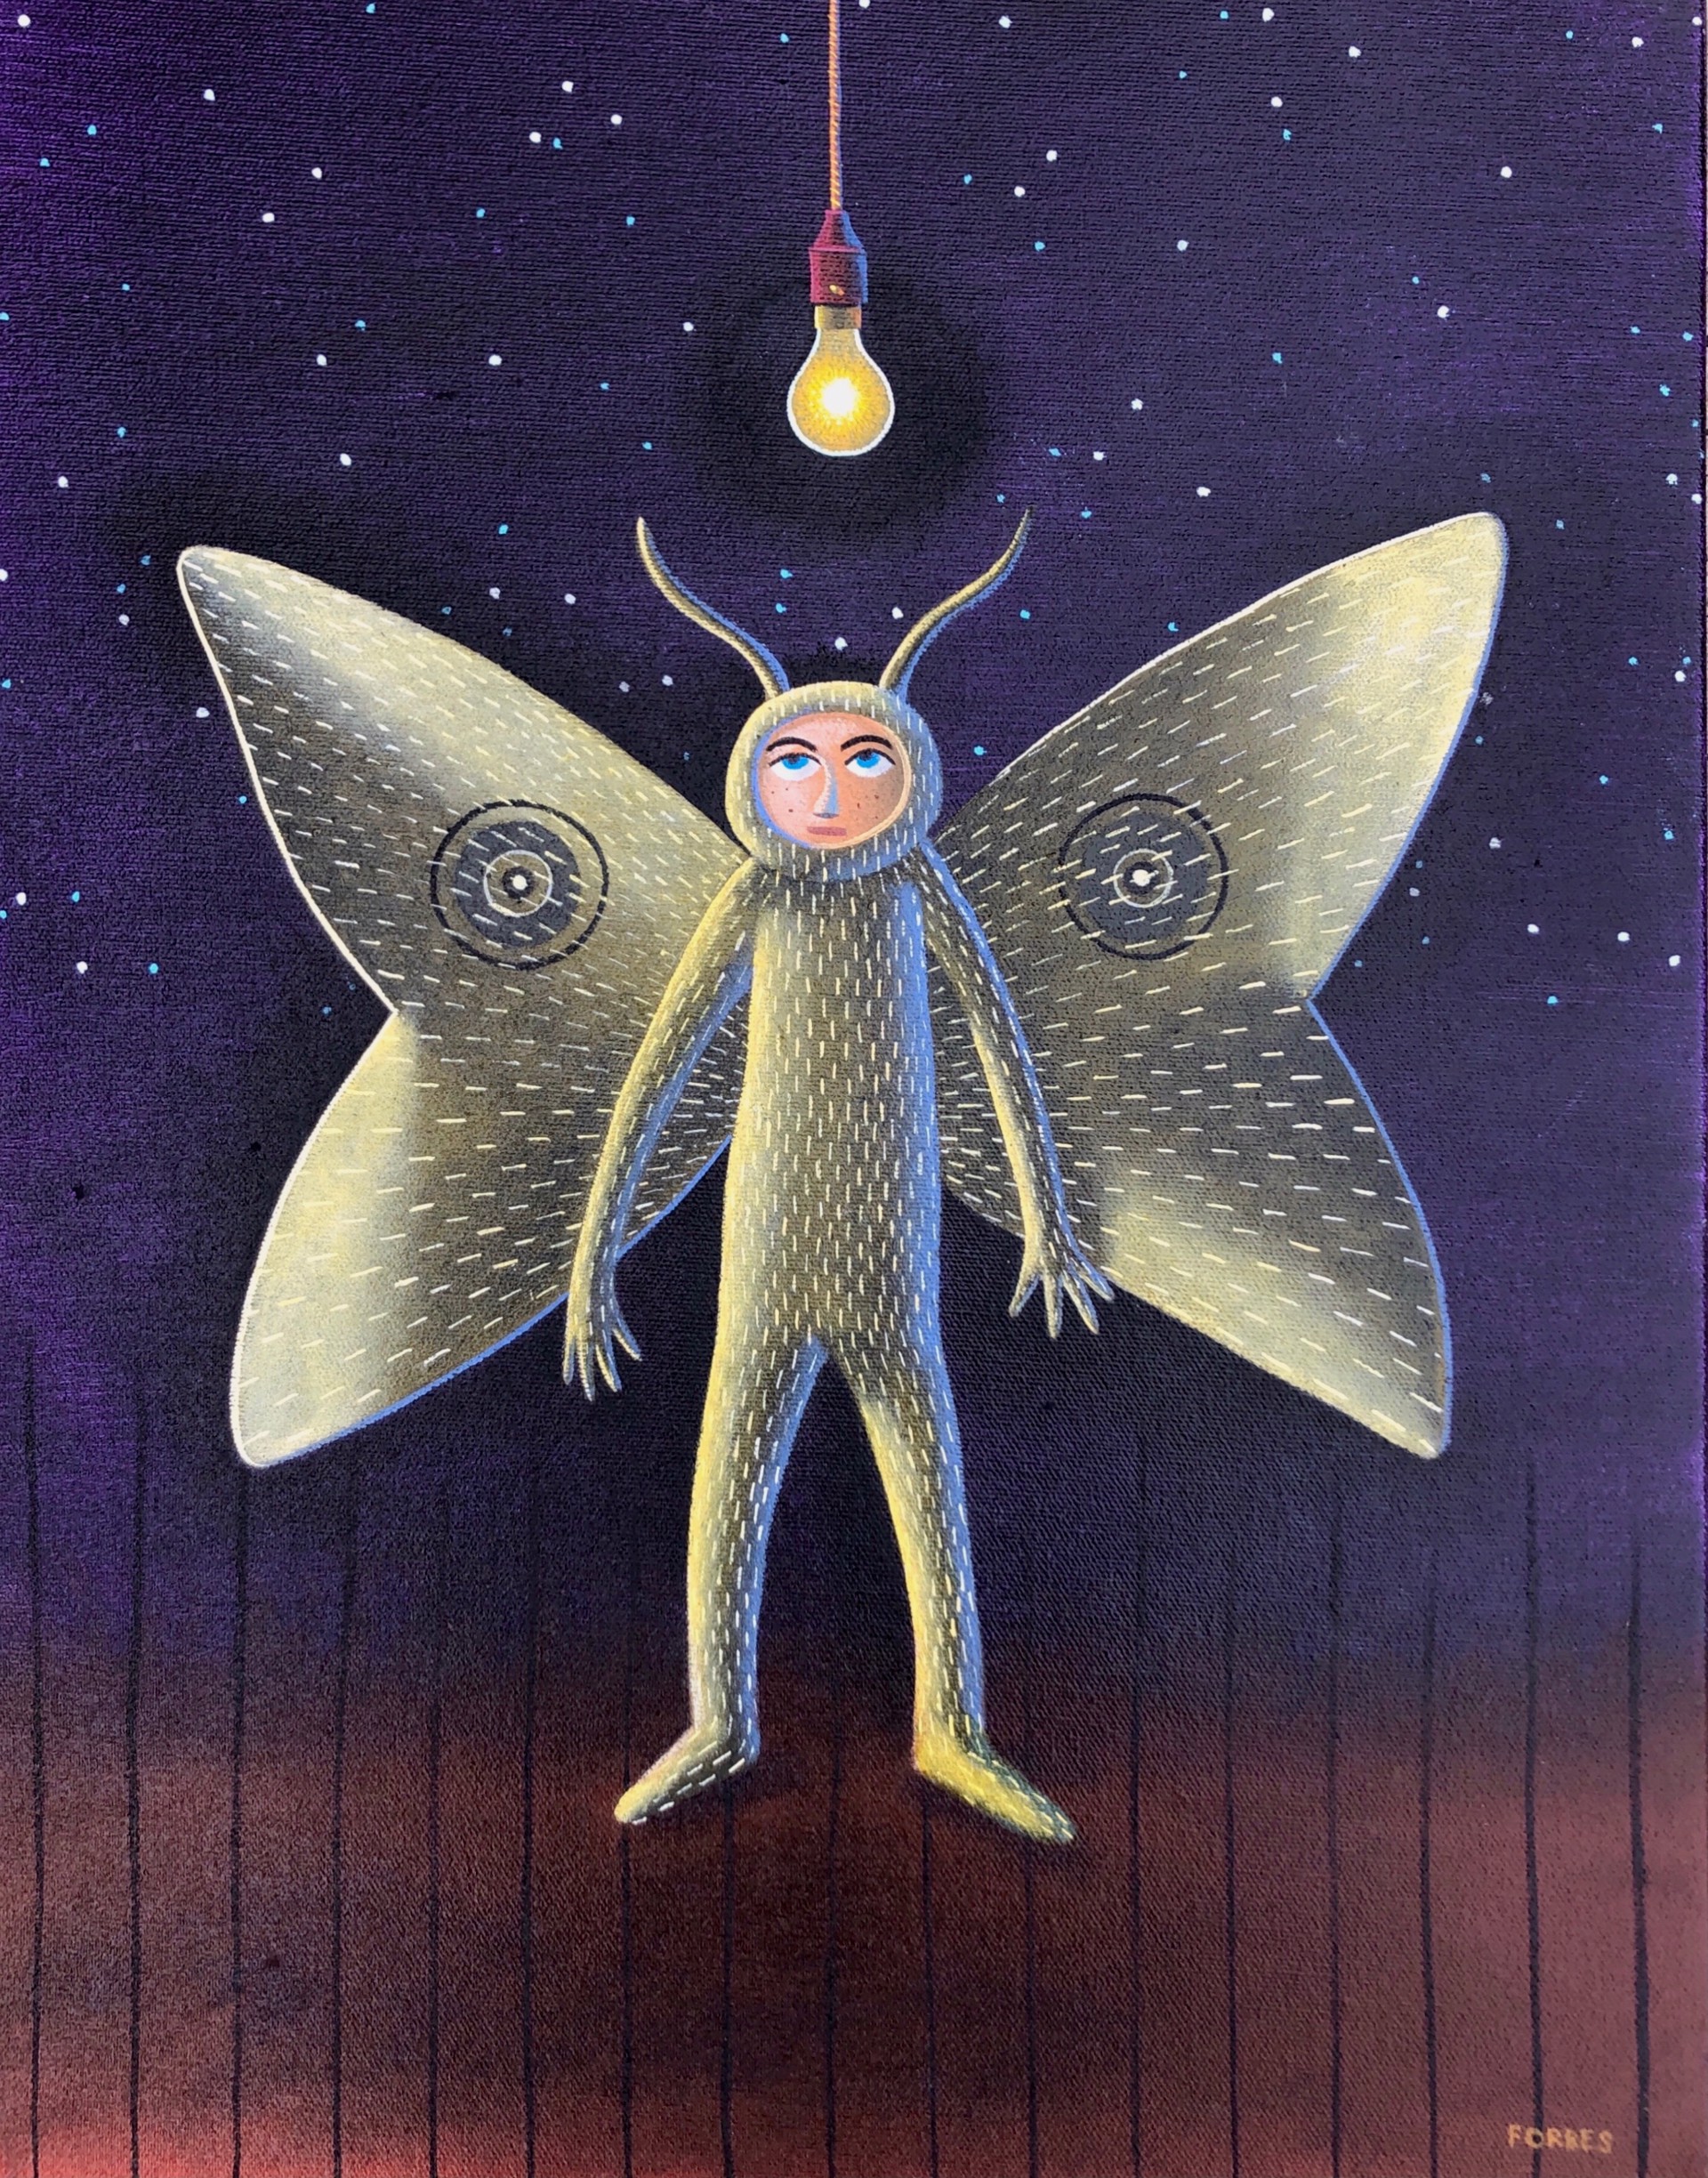 Return of the Moth Man by Rodney Forbes